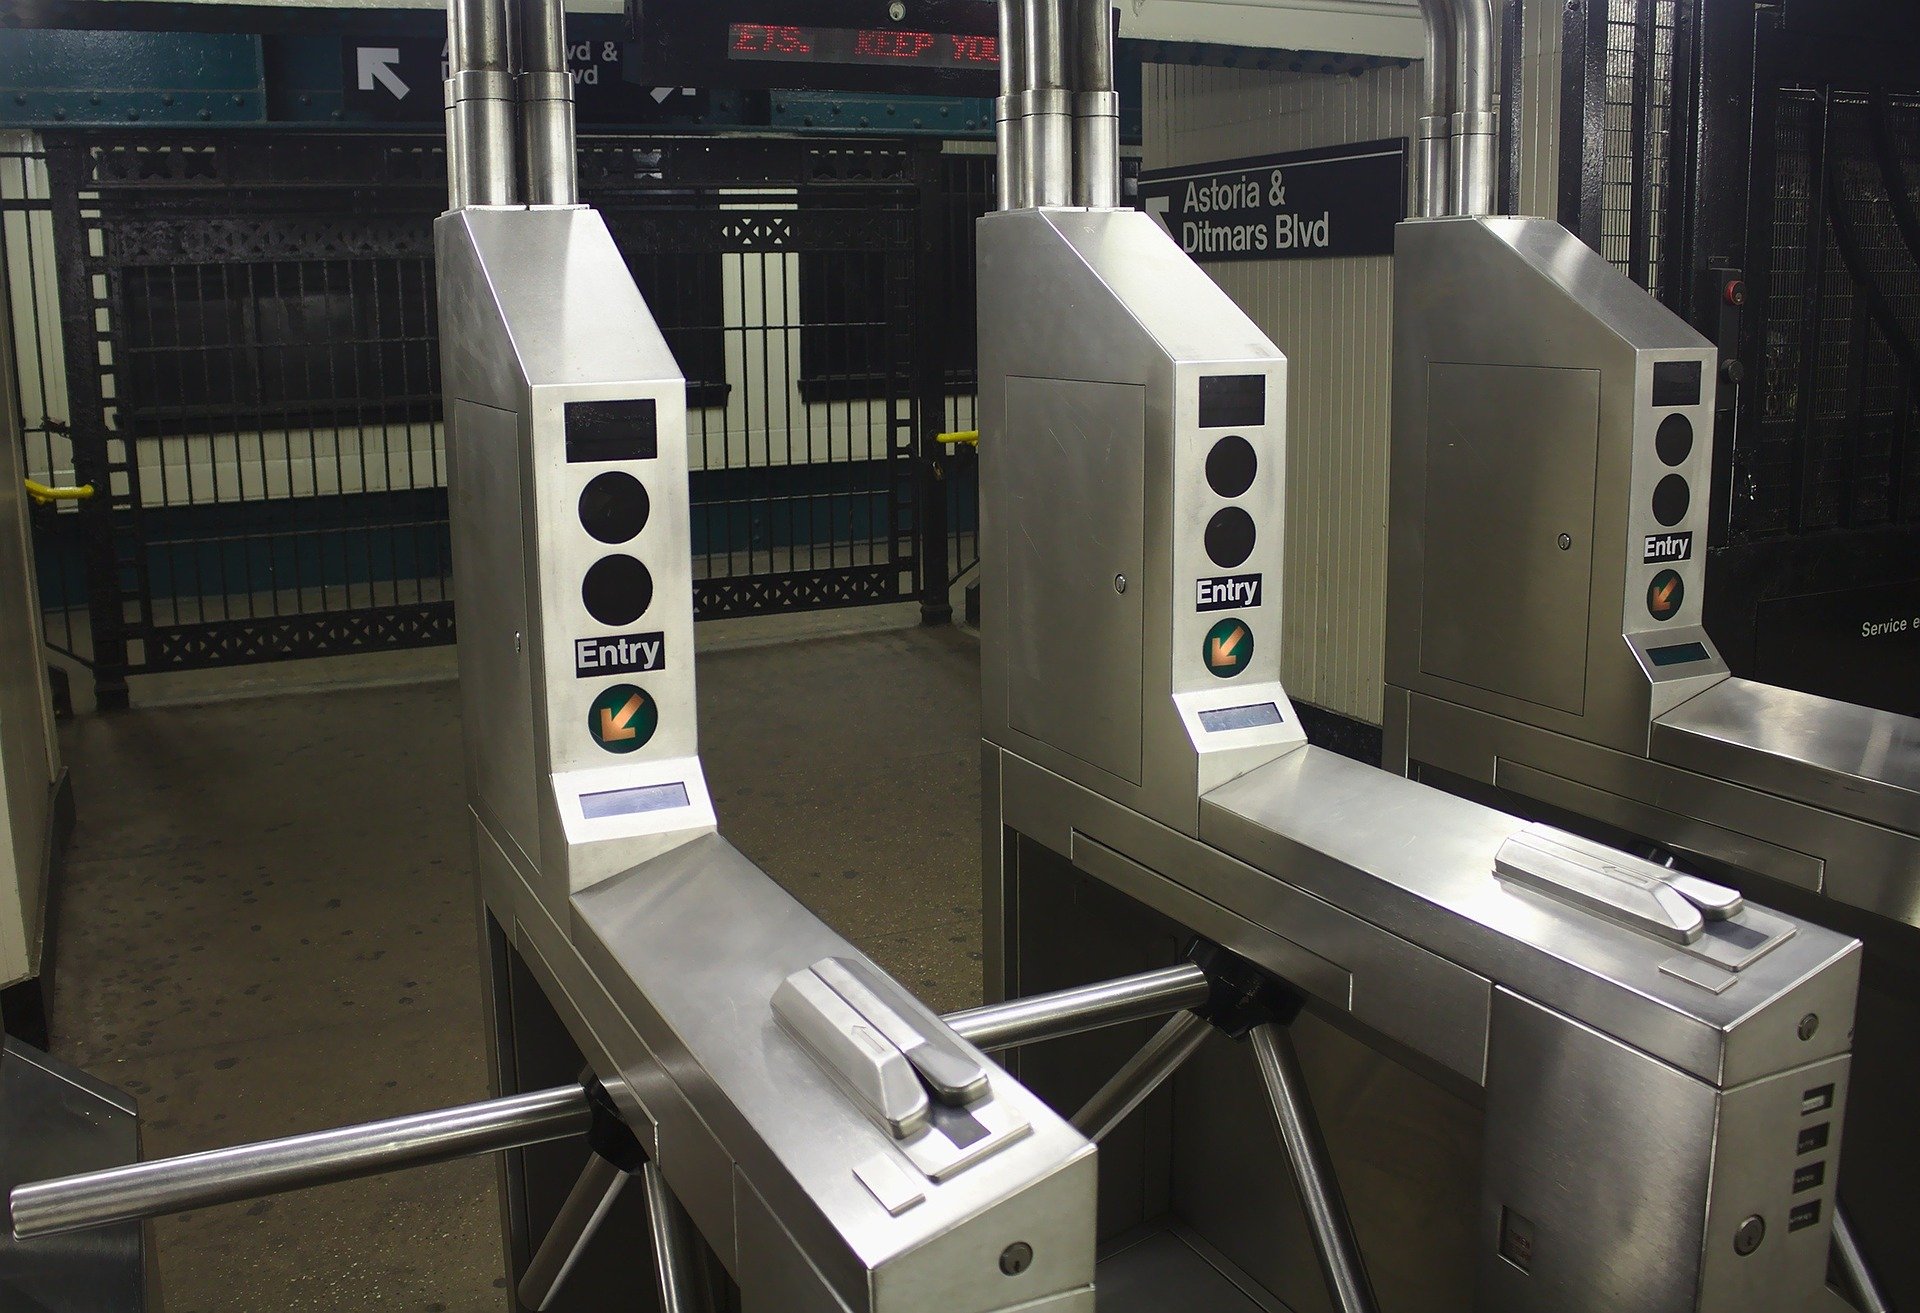 Review of turnstiles on the SecuteckRu website and in the Security & Safety Magazine – book your opportunity!